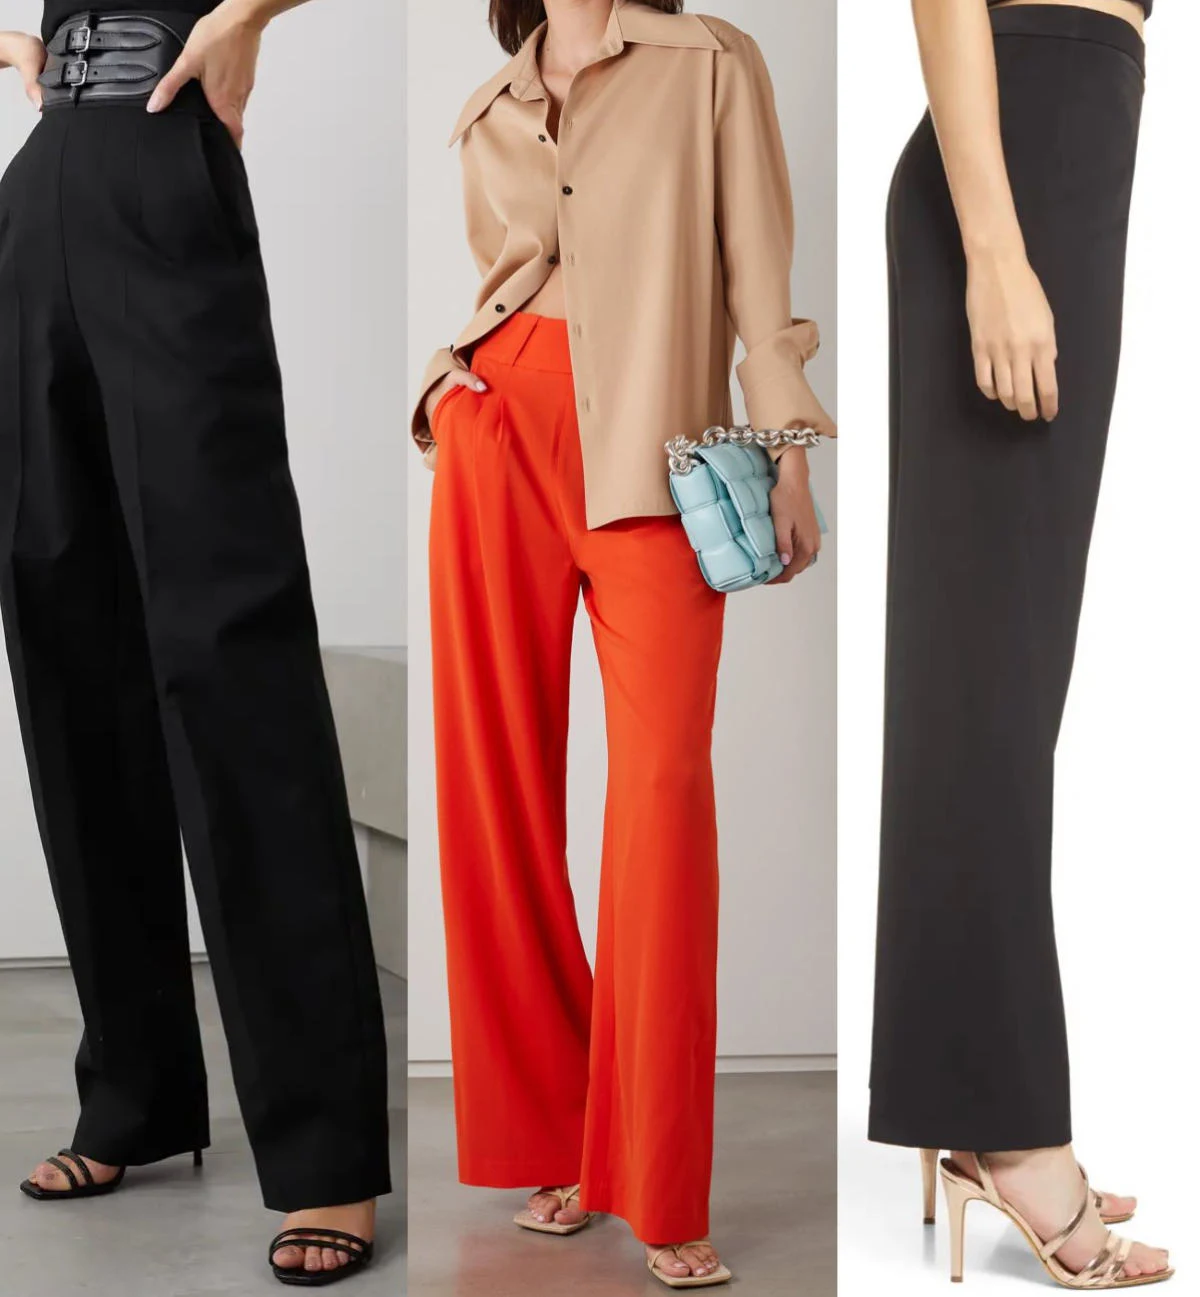 3 women wearing strappy heeled sandals shoes with wide leg pants and trousers.